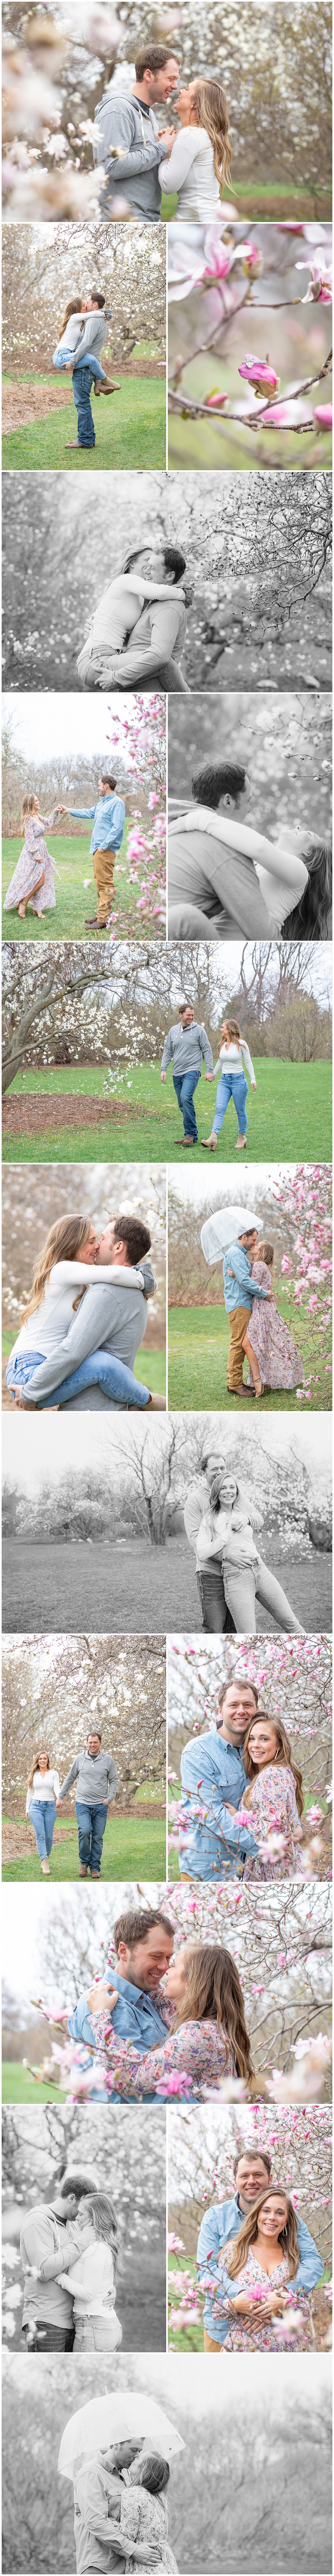 Collage of photos from a spring engagement session at UW Madison's Arboretum featuring magnolia blooms and a young couple
